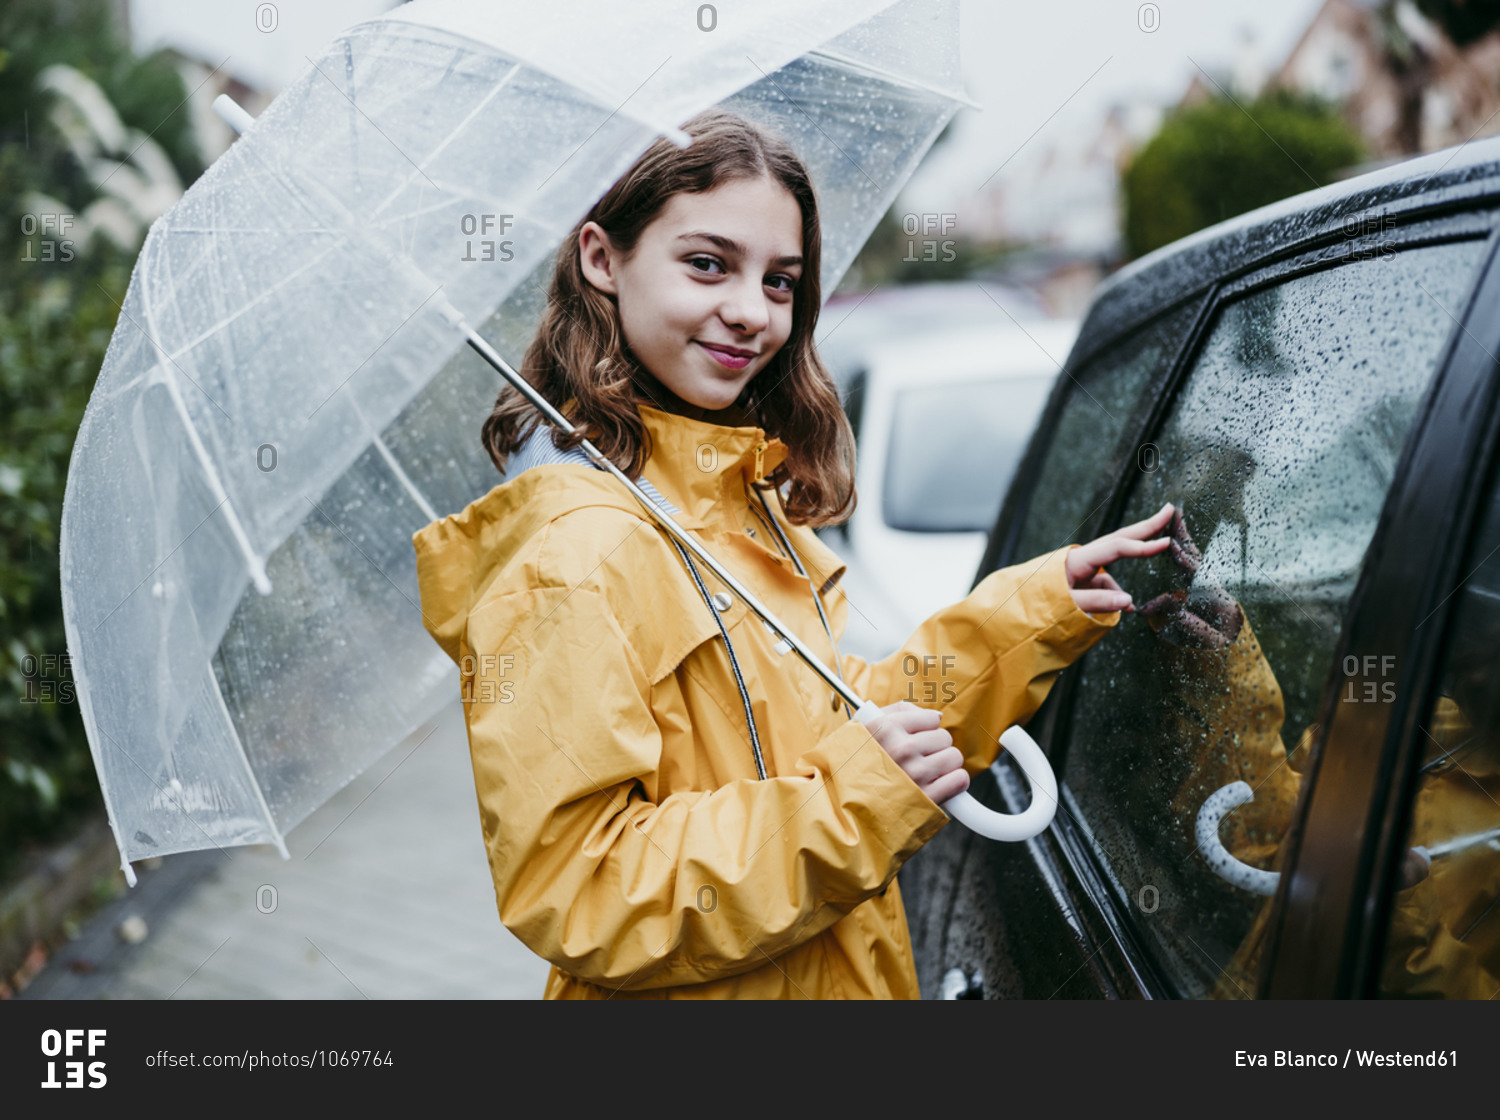 Smiling girl in raincoat holding umbrella while standing by car in city